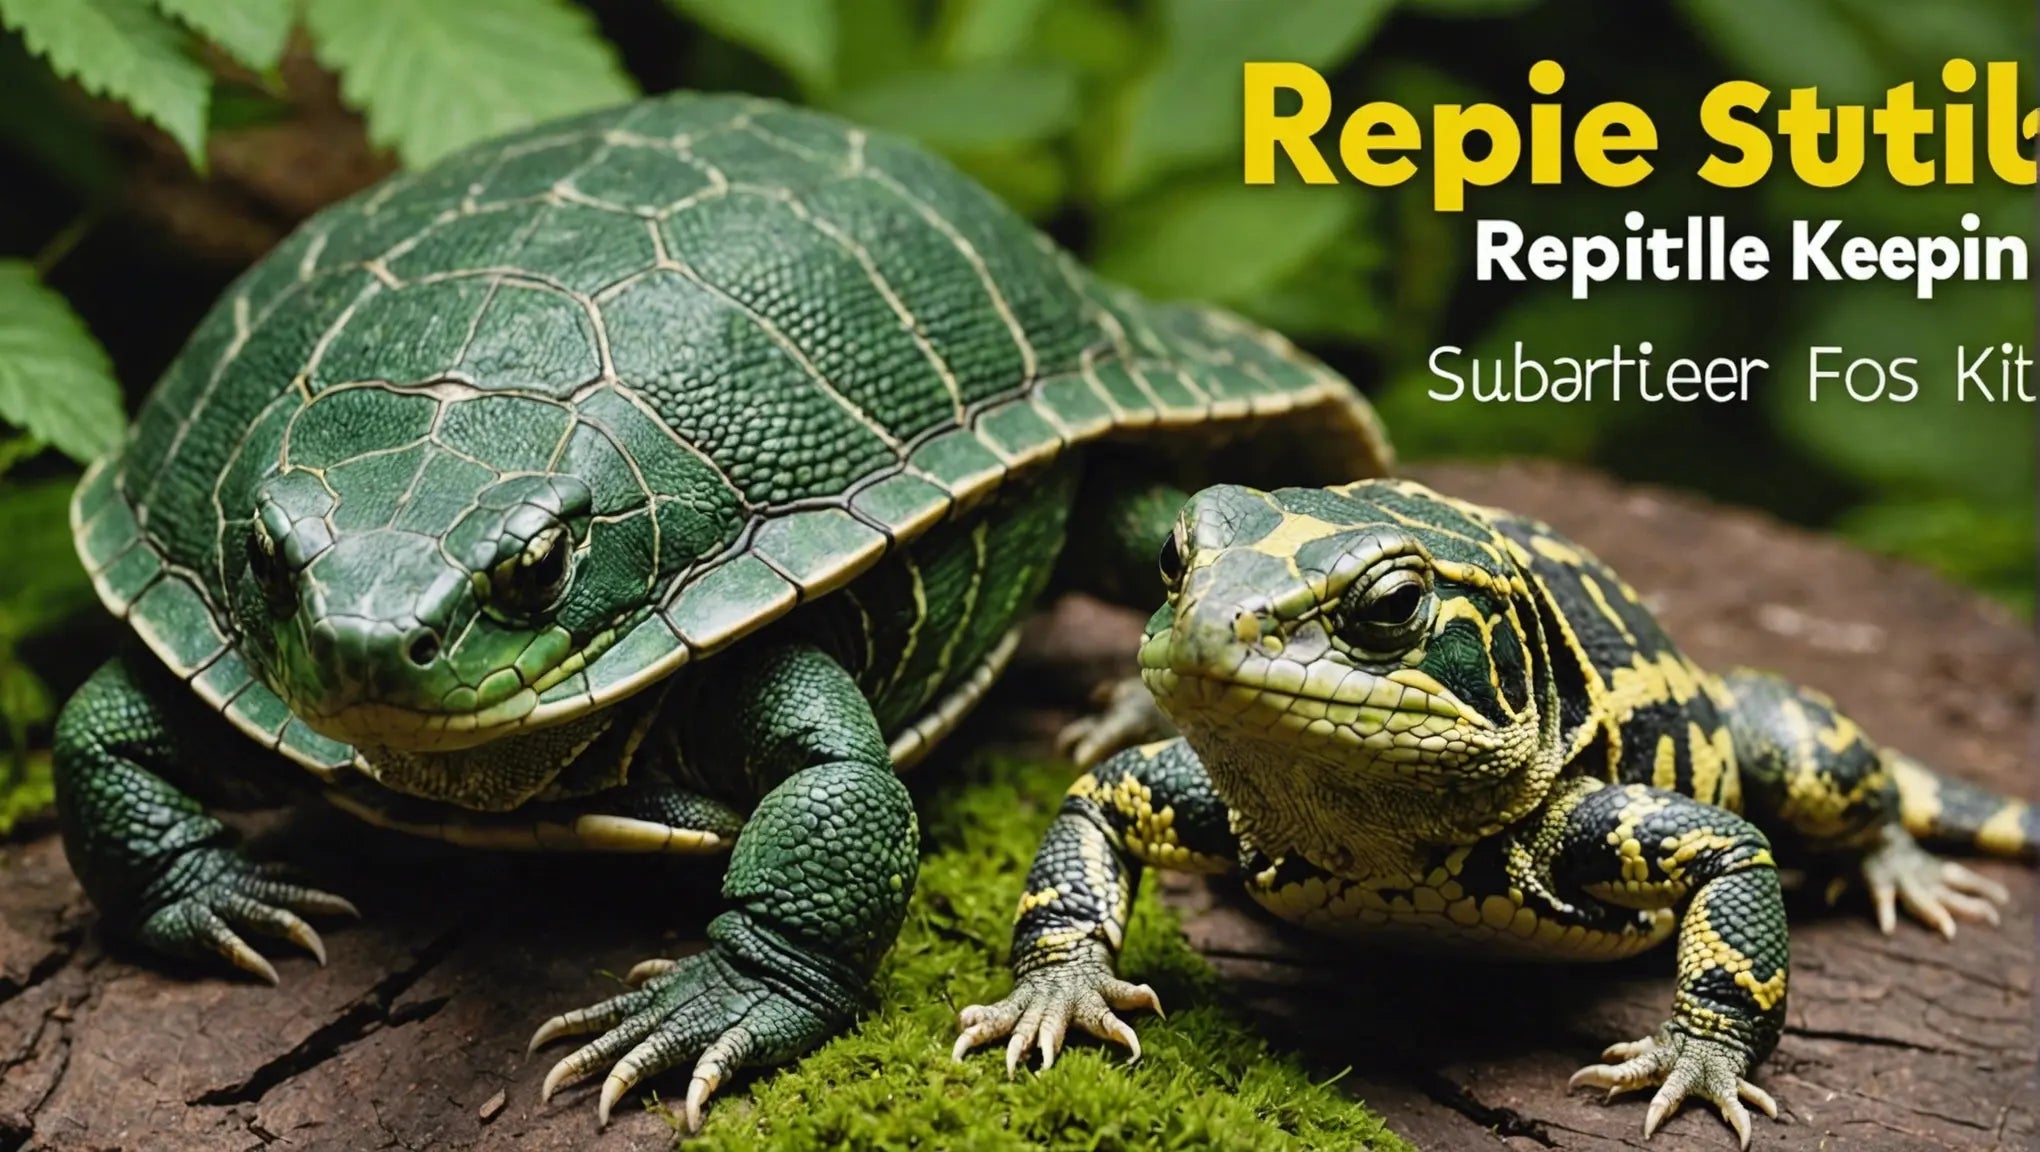 Get Started with Reptile Keeping with These Starter Kits